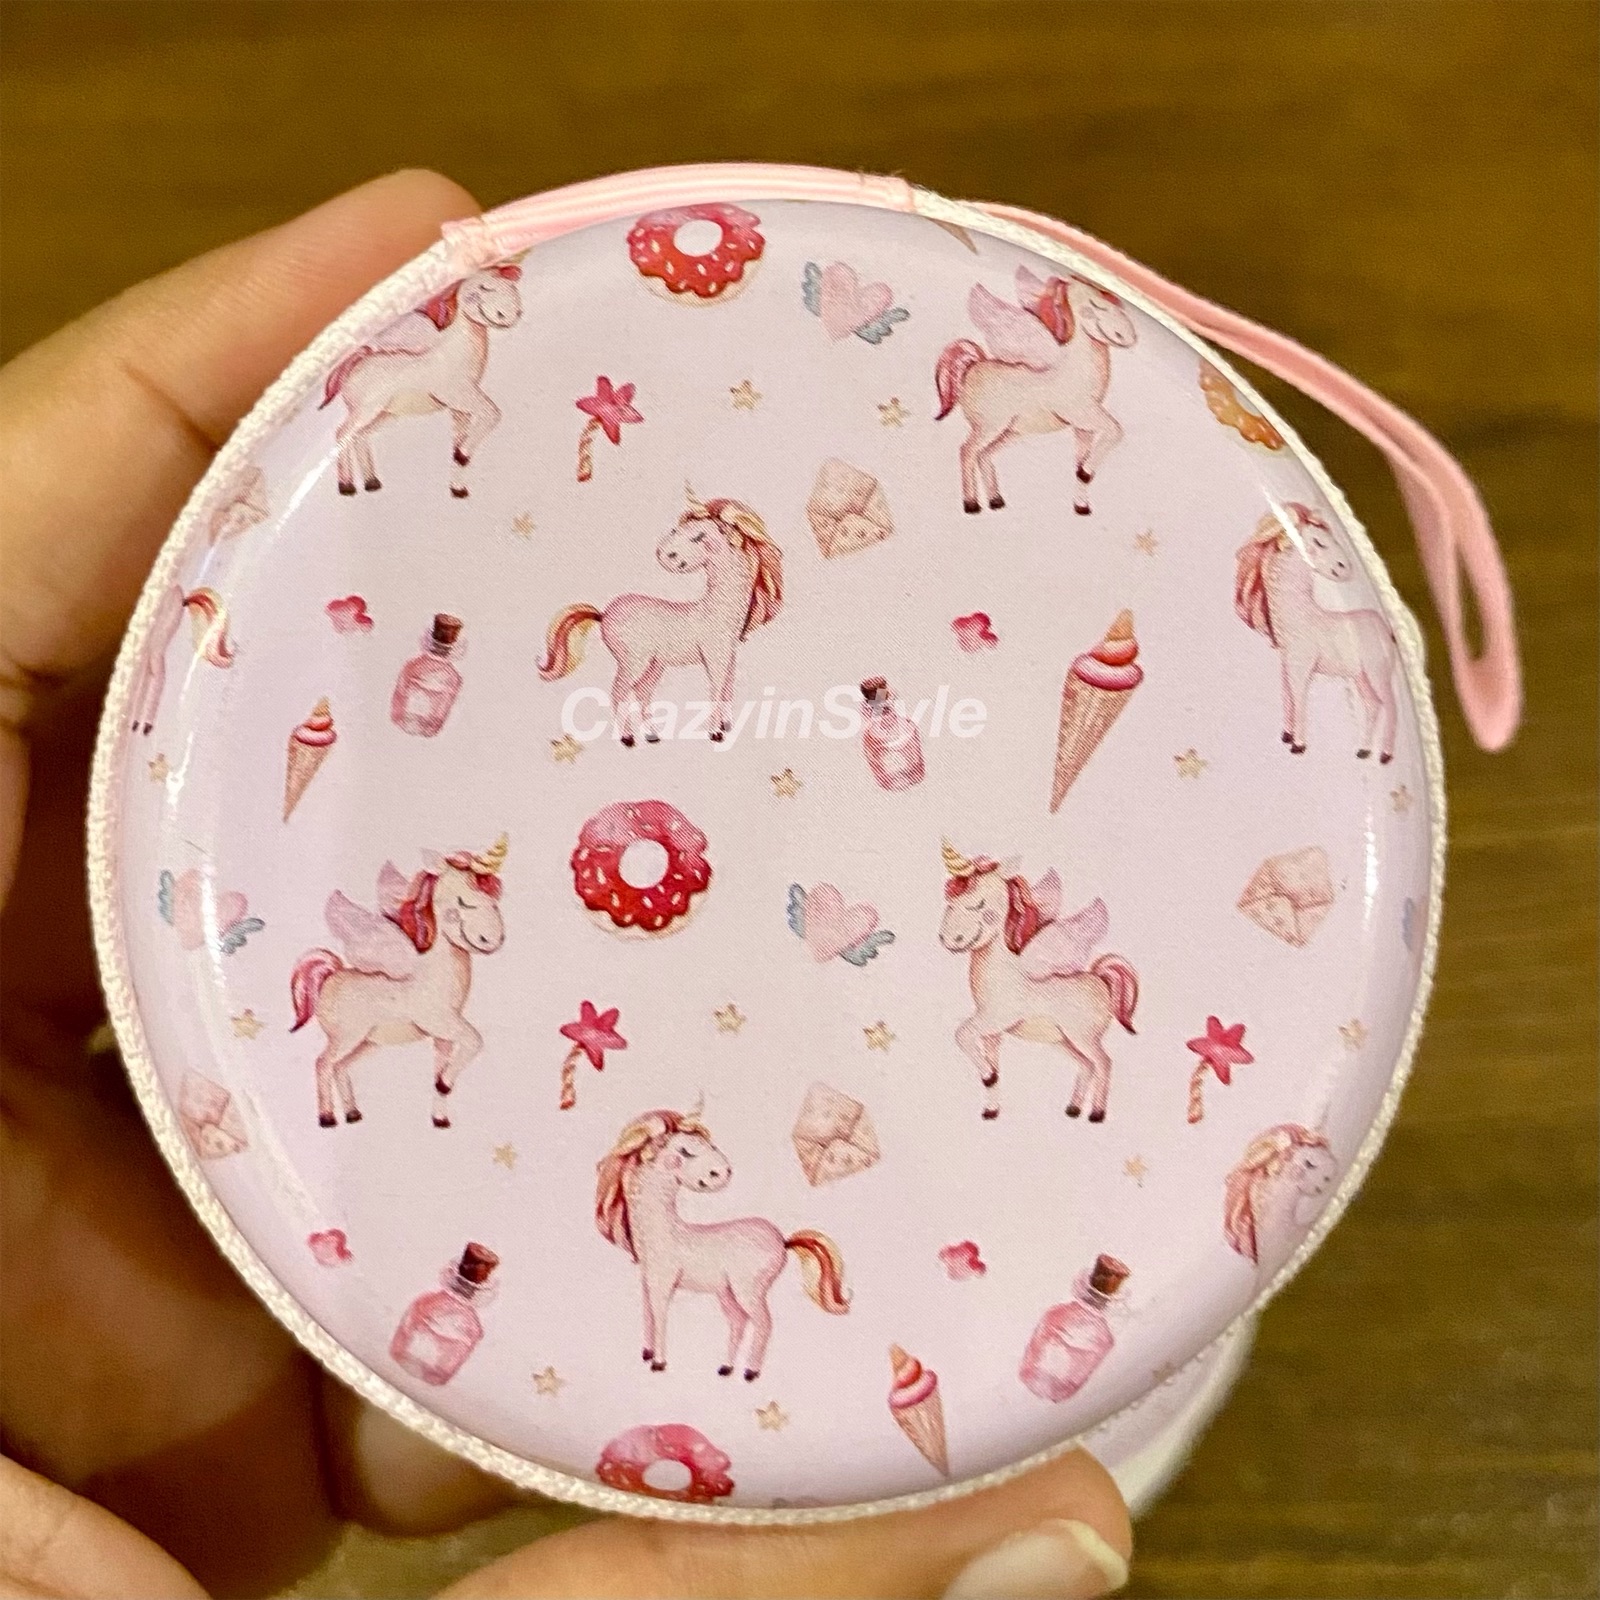 Buy LIGHTER HOUSE� Holograhic Unicorn Coin Purse Semi Circle Wallet Girl  Clutch Bag Cute Cartoon Semicircle Coin Purse (01 Pc.) Assorted Colour at  Amazon.in